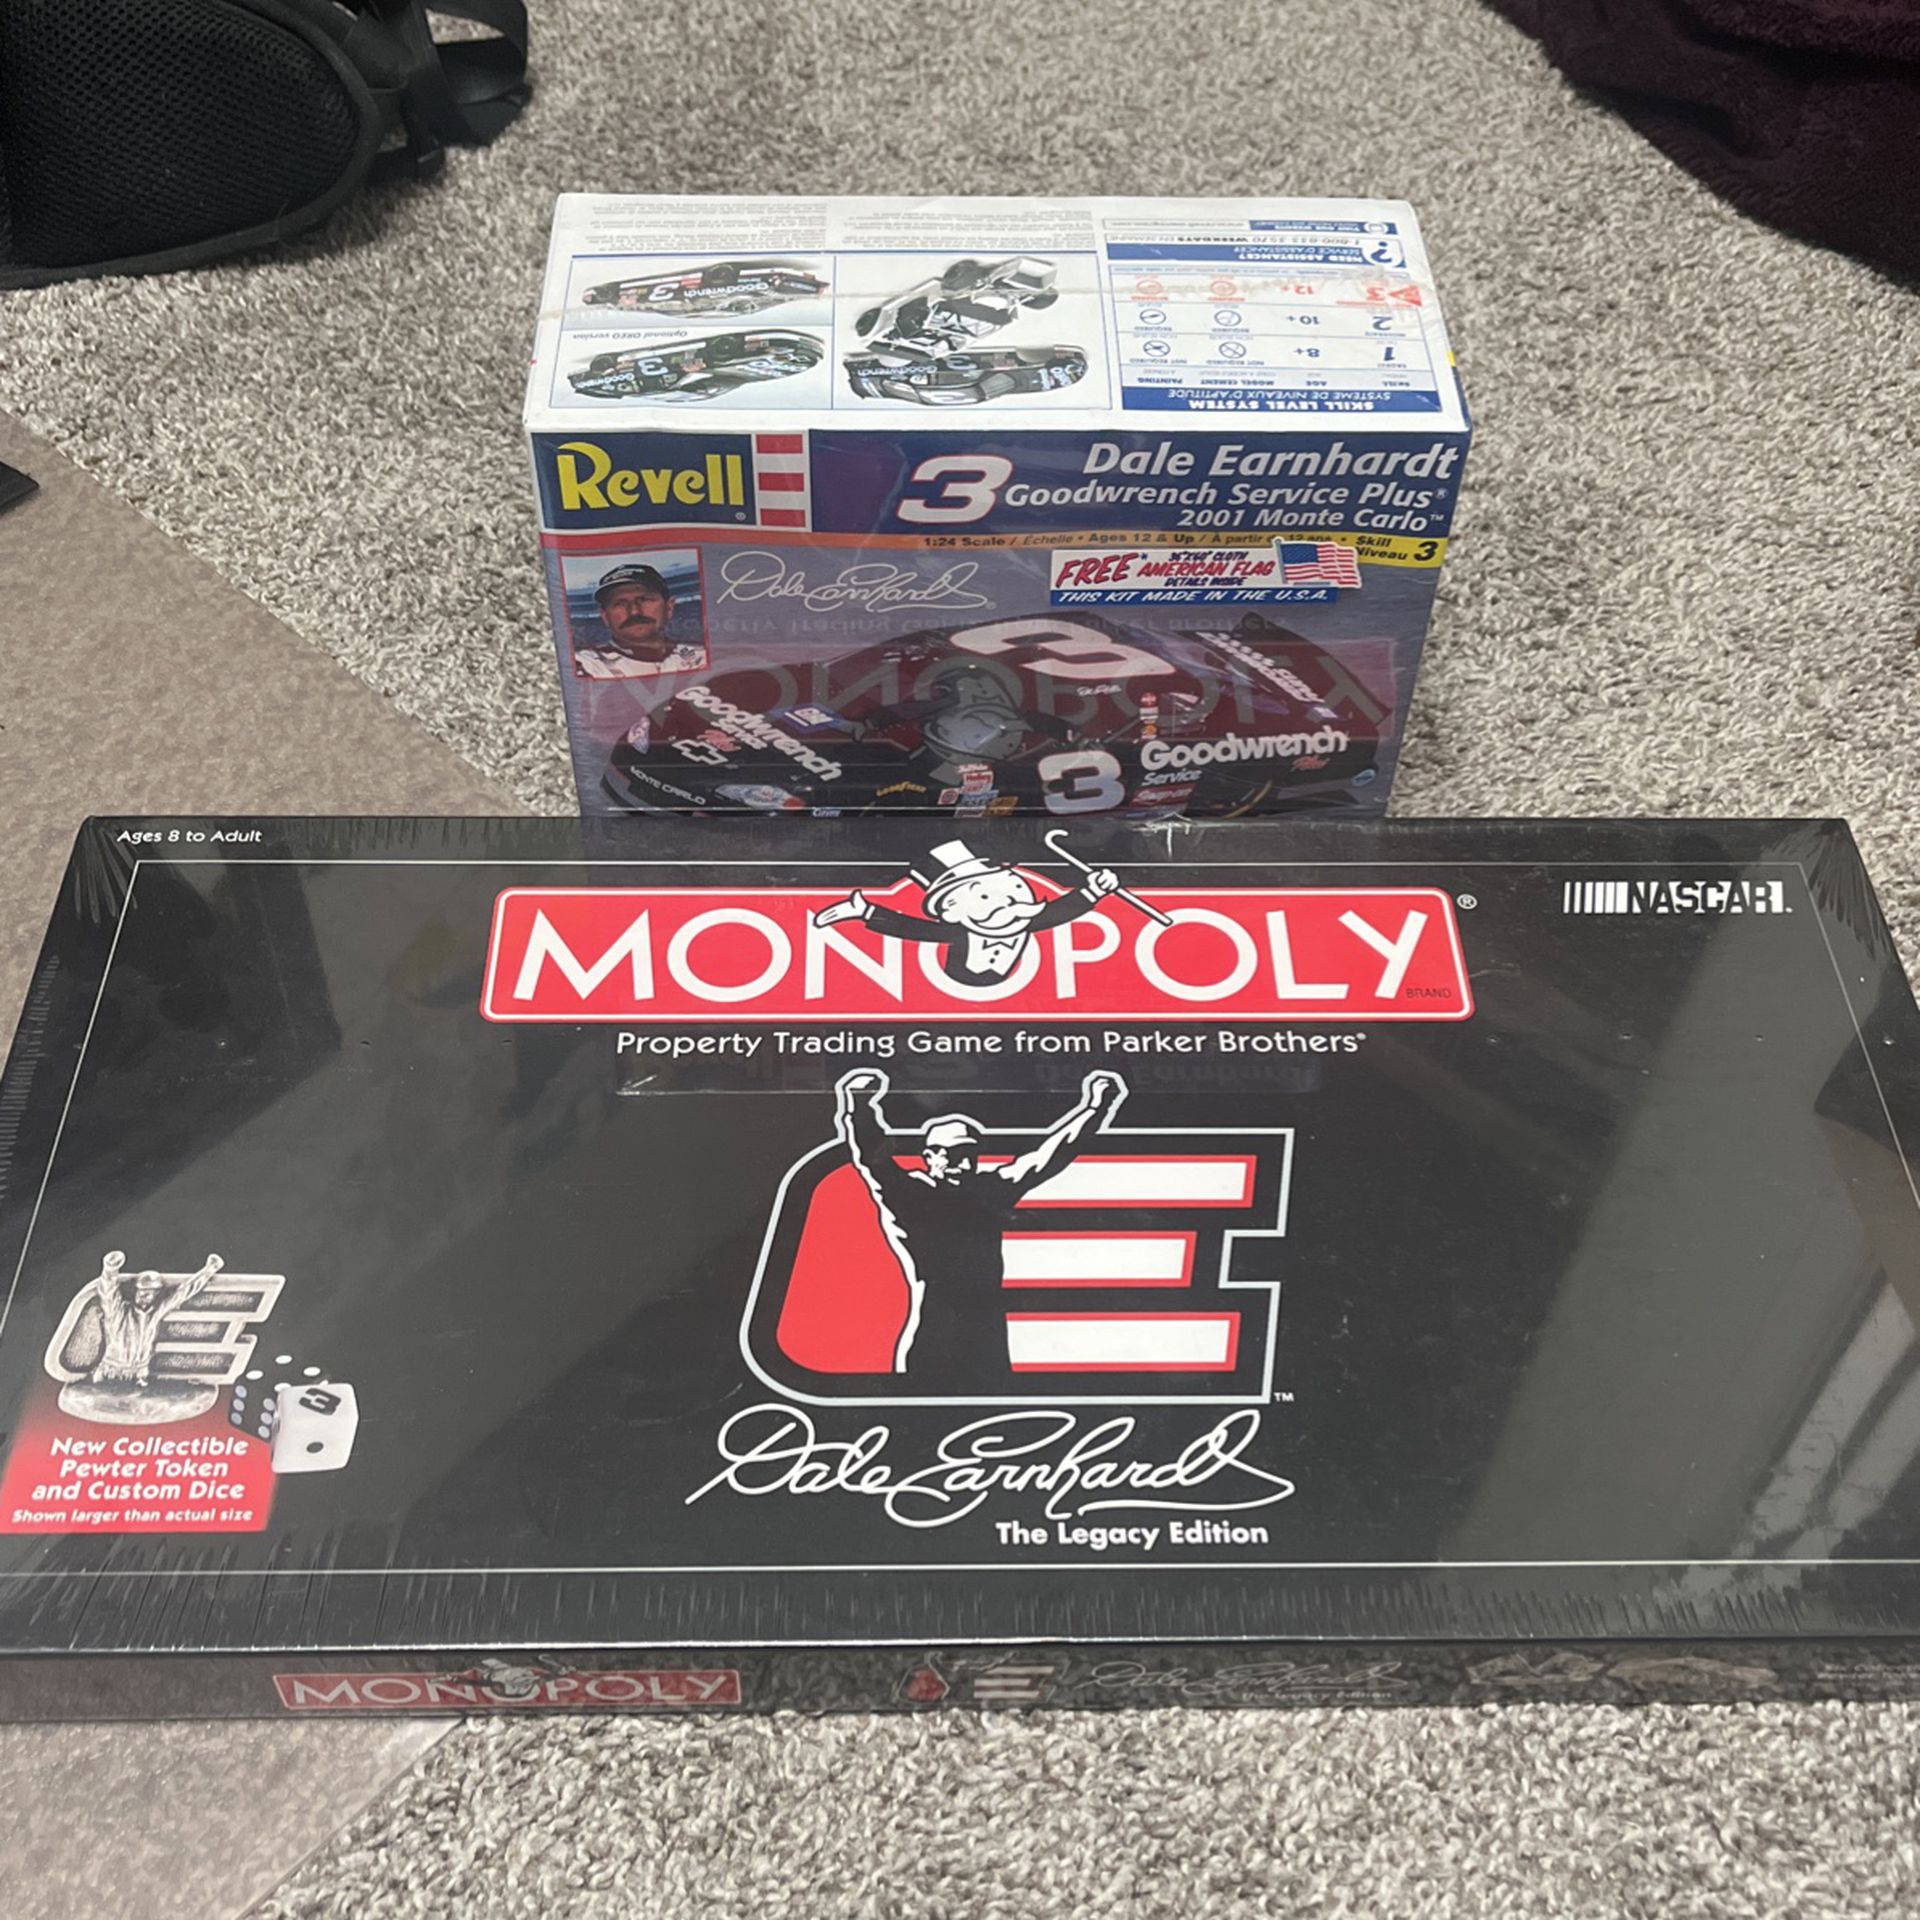 Dale Earnhardt Monopoly Game And 2001 Good wrench Model